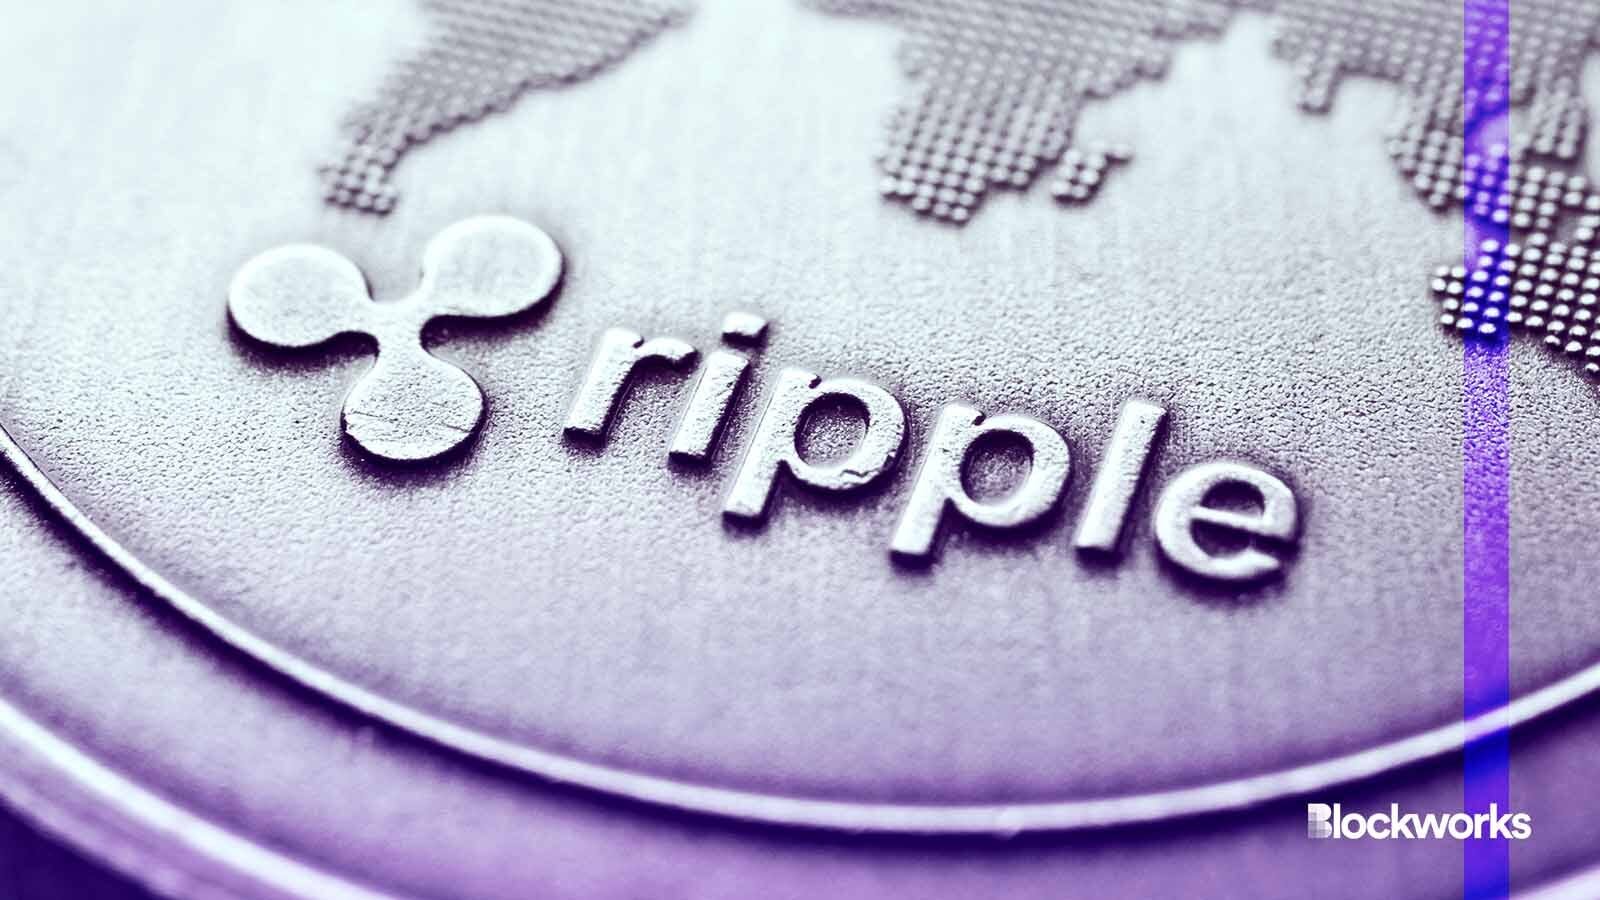 Ripple commits to buying back $285M worth of shares - Blockworks